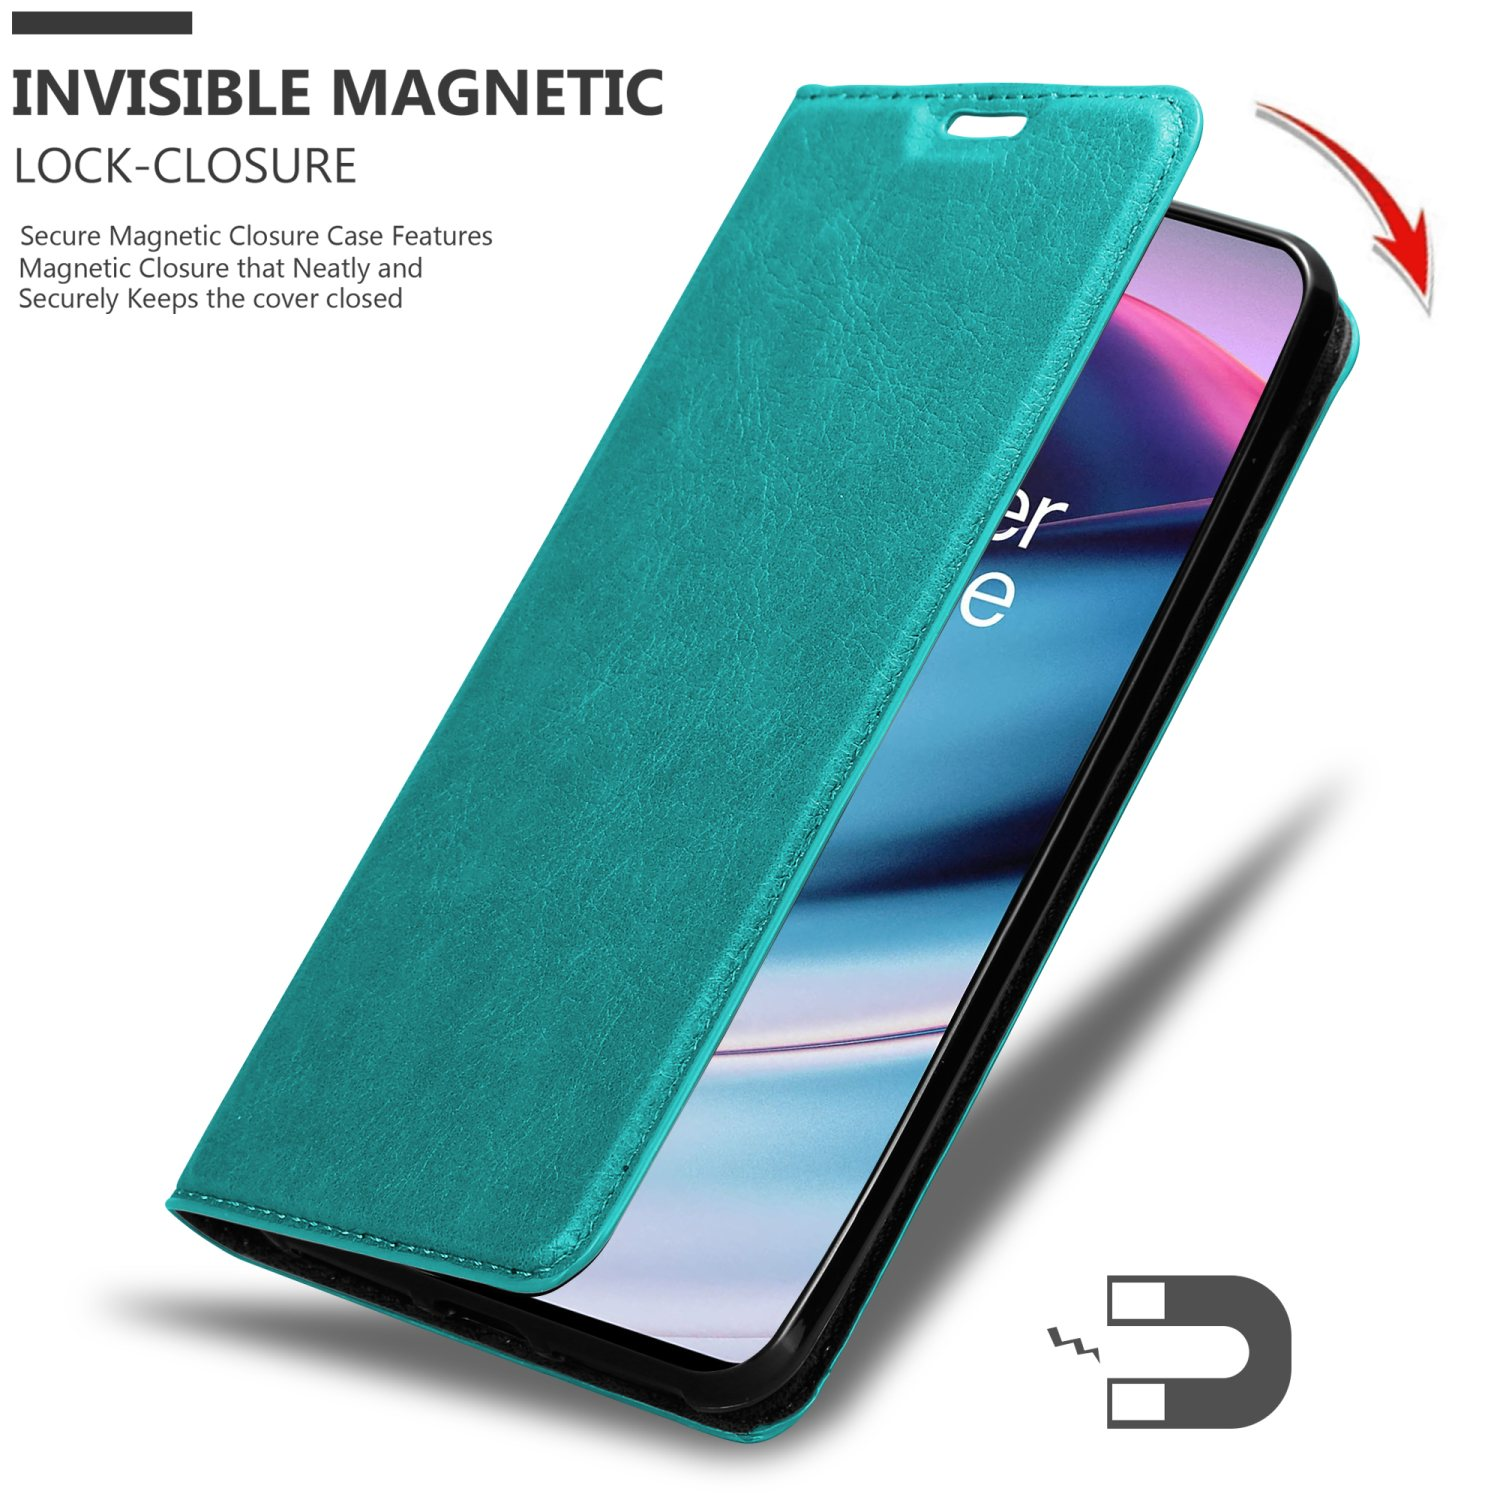 CADORABO Book Hülle Invisible Nord Magnet, PETROL TÜRKIS Bookcover, OnePlus, 5G, CE